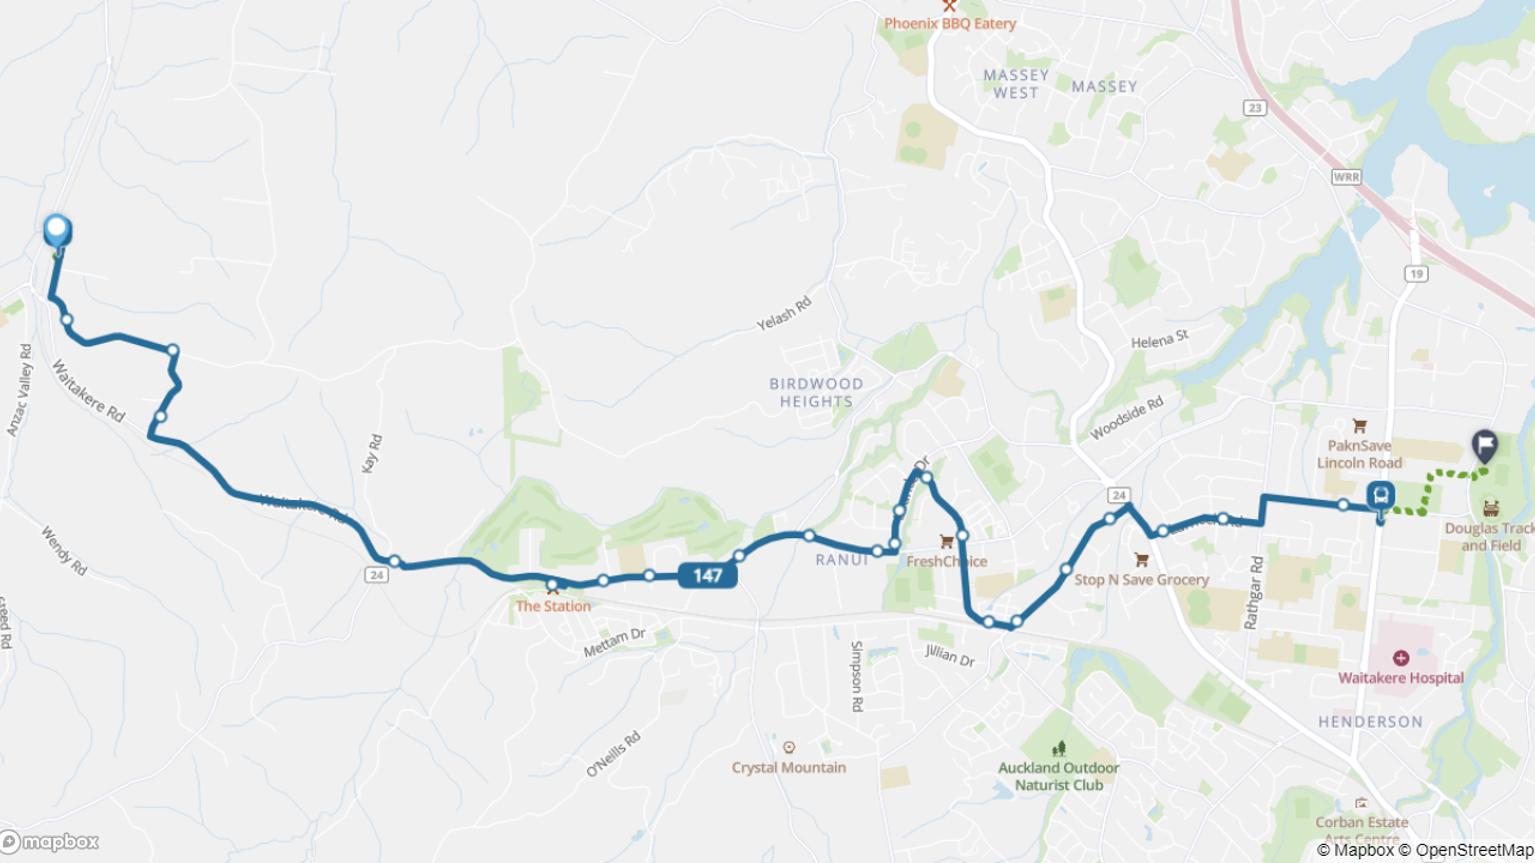 Waitakere to The Trusts Arena bus route 147 map